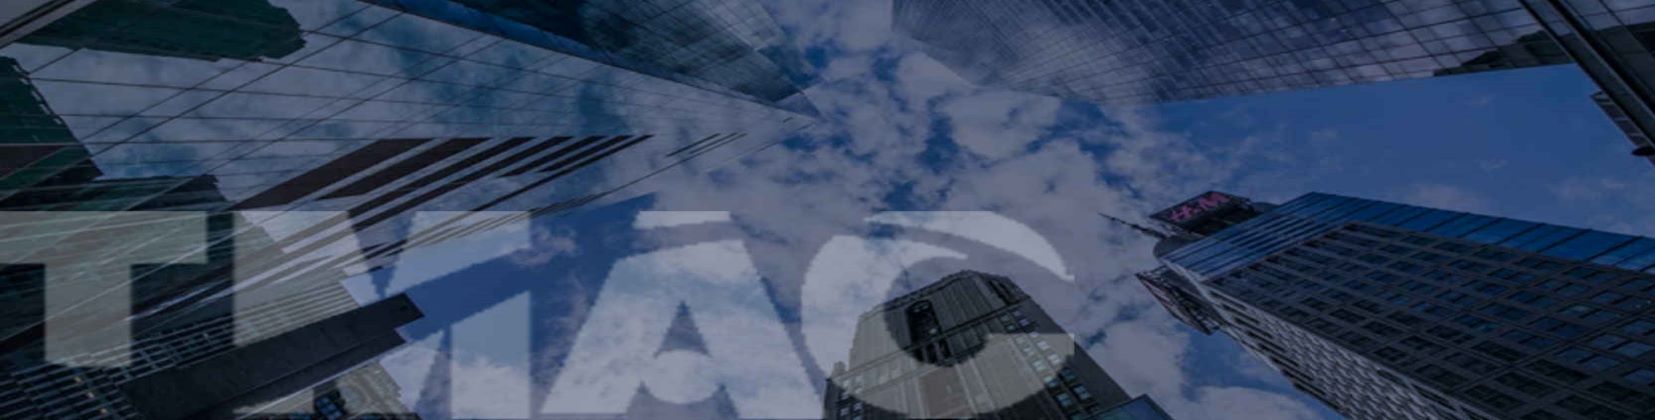 Background image of TMAC logo on panoramic view among buildings